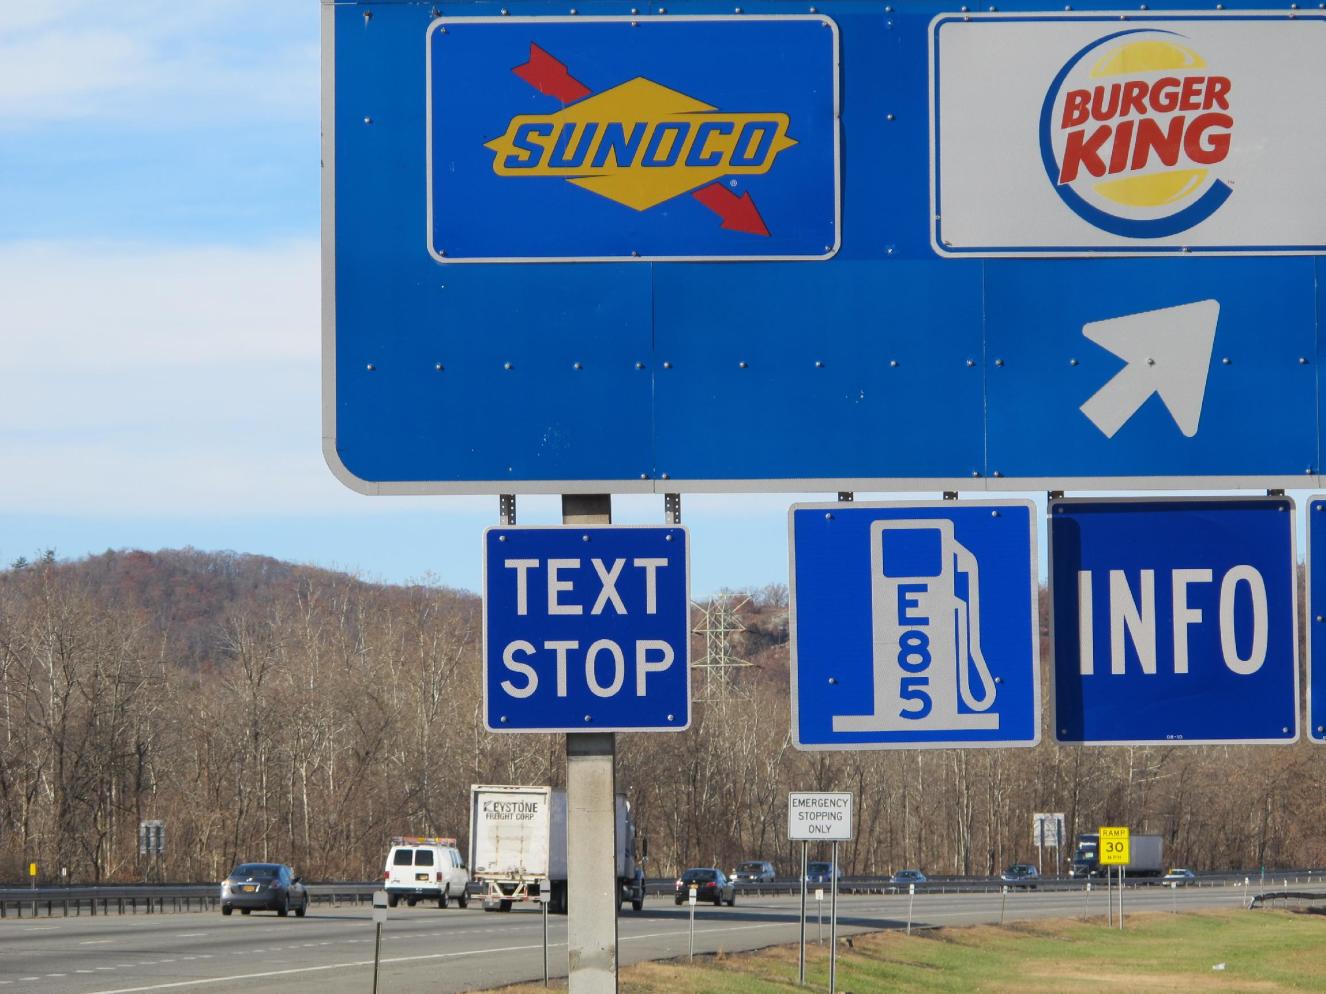 A new "text stop" notification is seen on a sign for a service area on the New York State Thruway in Sloatsburg, N.Y., on Thursday, Nov. 14, 2013. A state crackdown on texting while driving includes designating many pull-off areas as text stops. (AP Photo/Jim Fitzgerald)